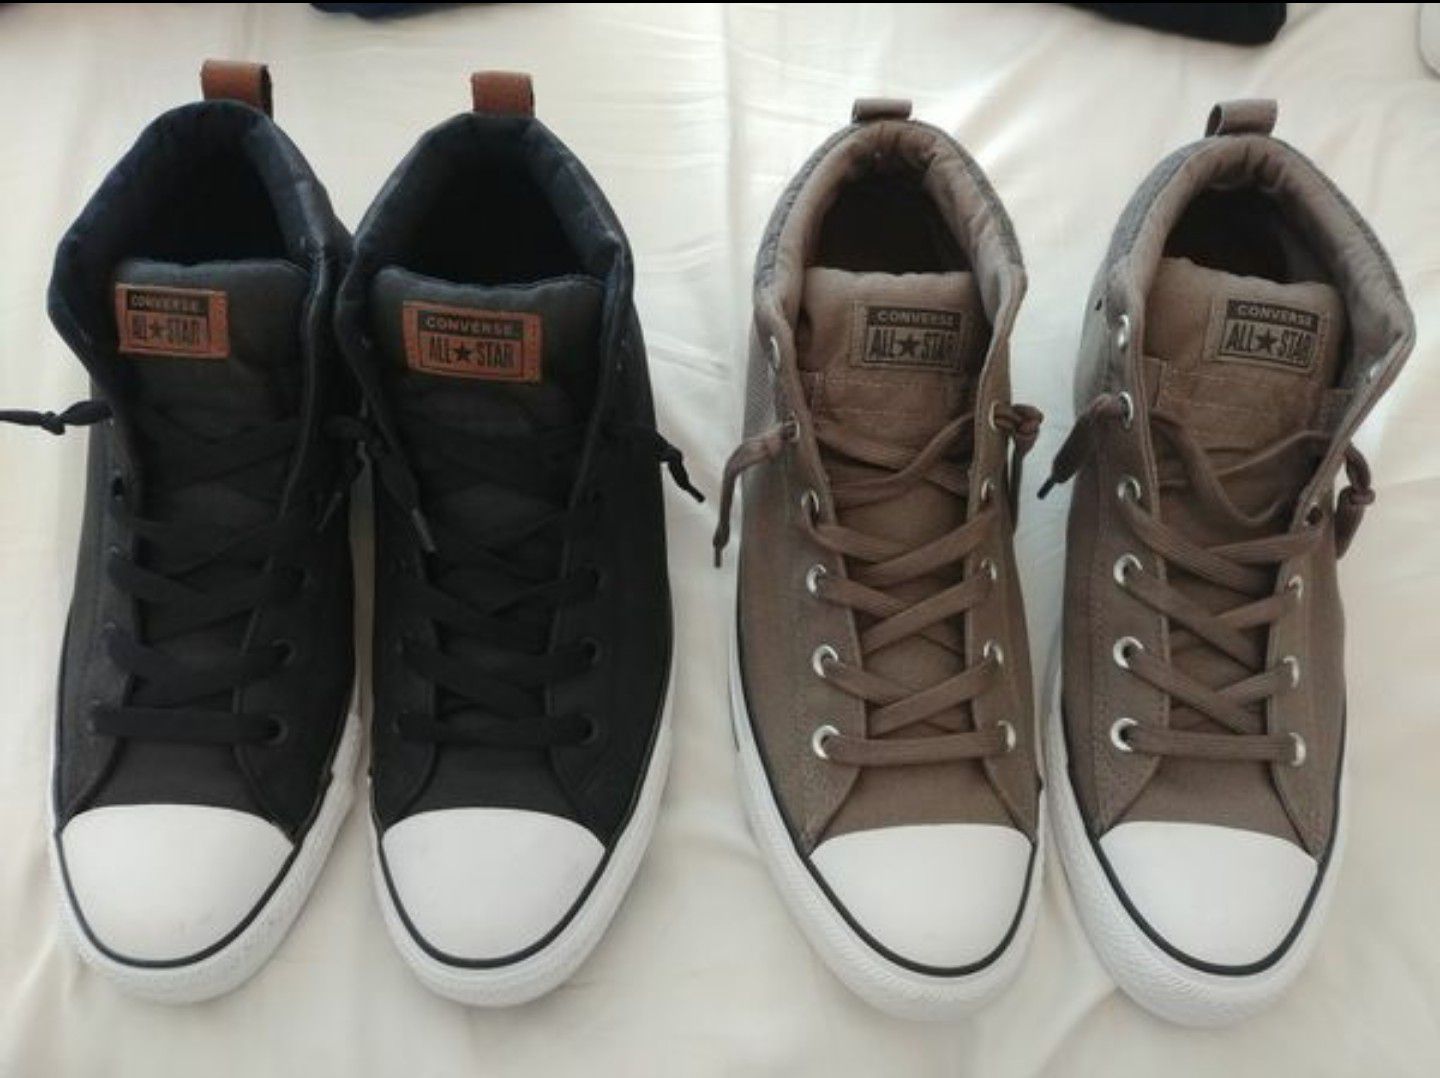 Converse Midtop Sneakers !! BRAND NEW !! Size 12 Mens